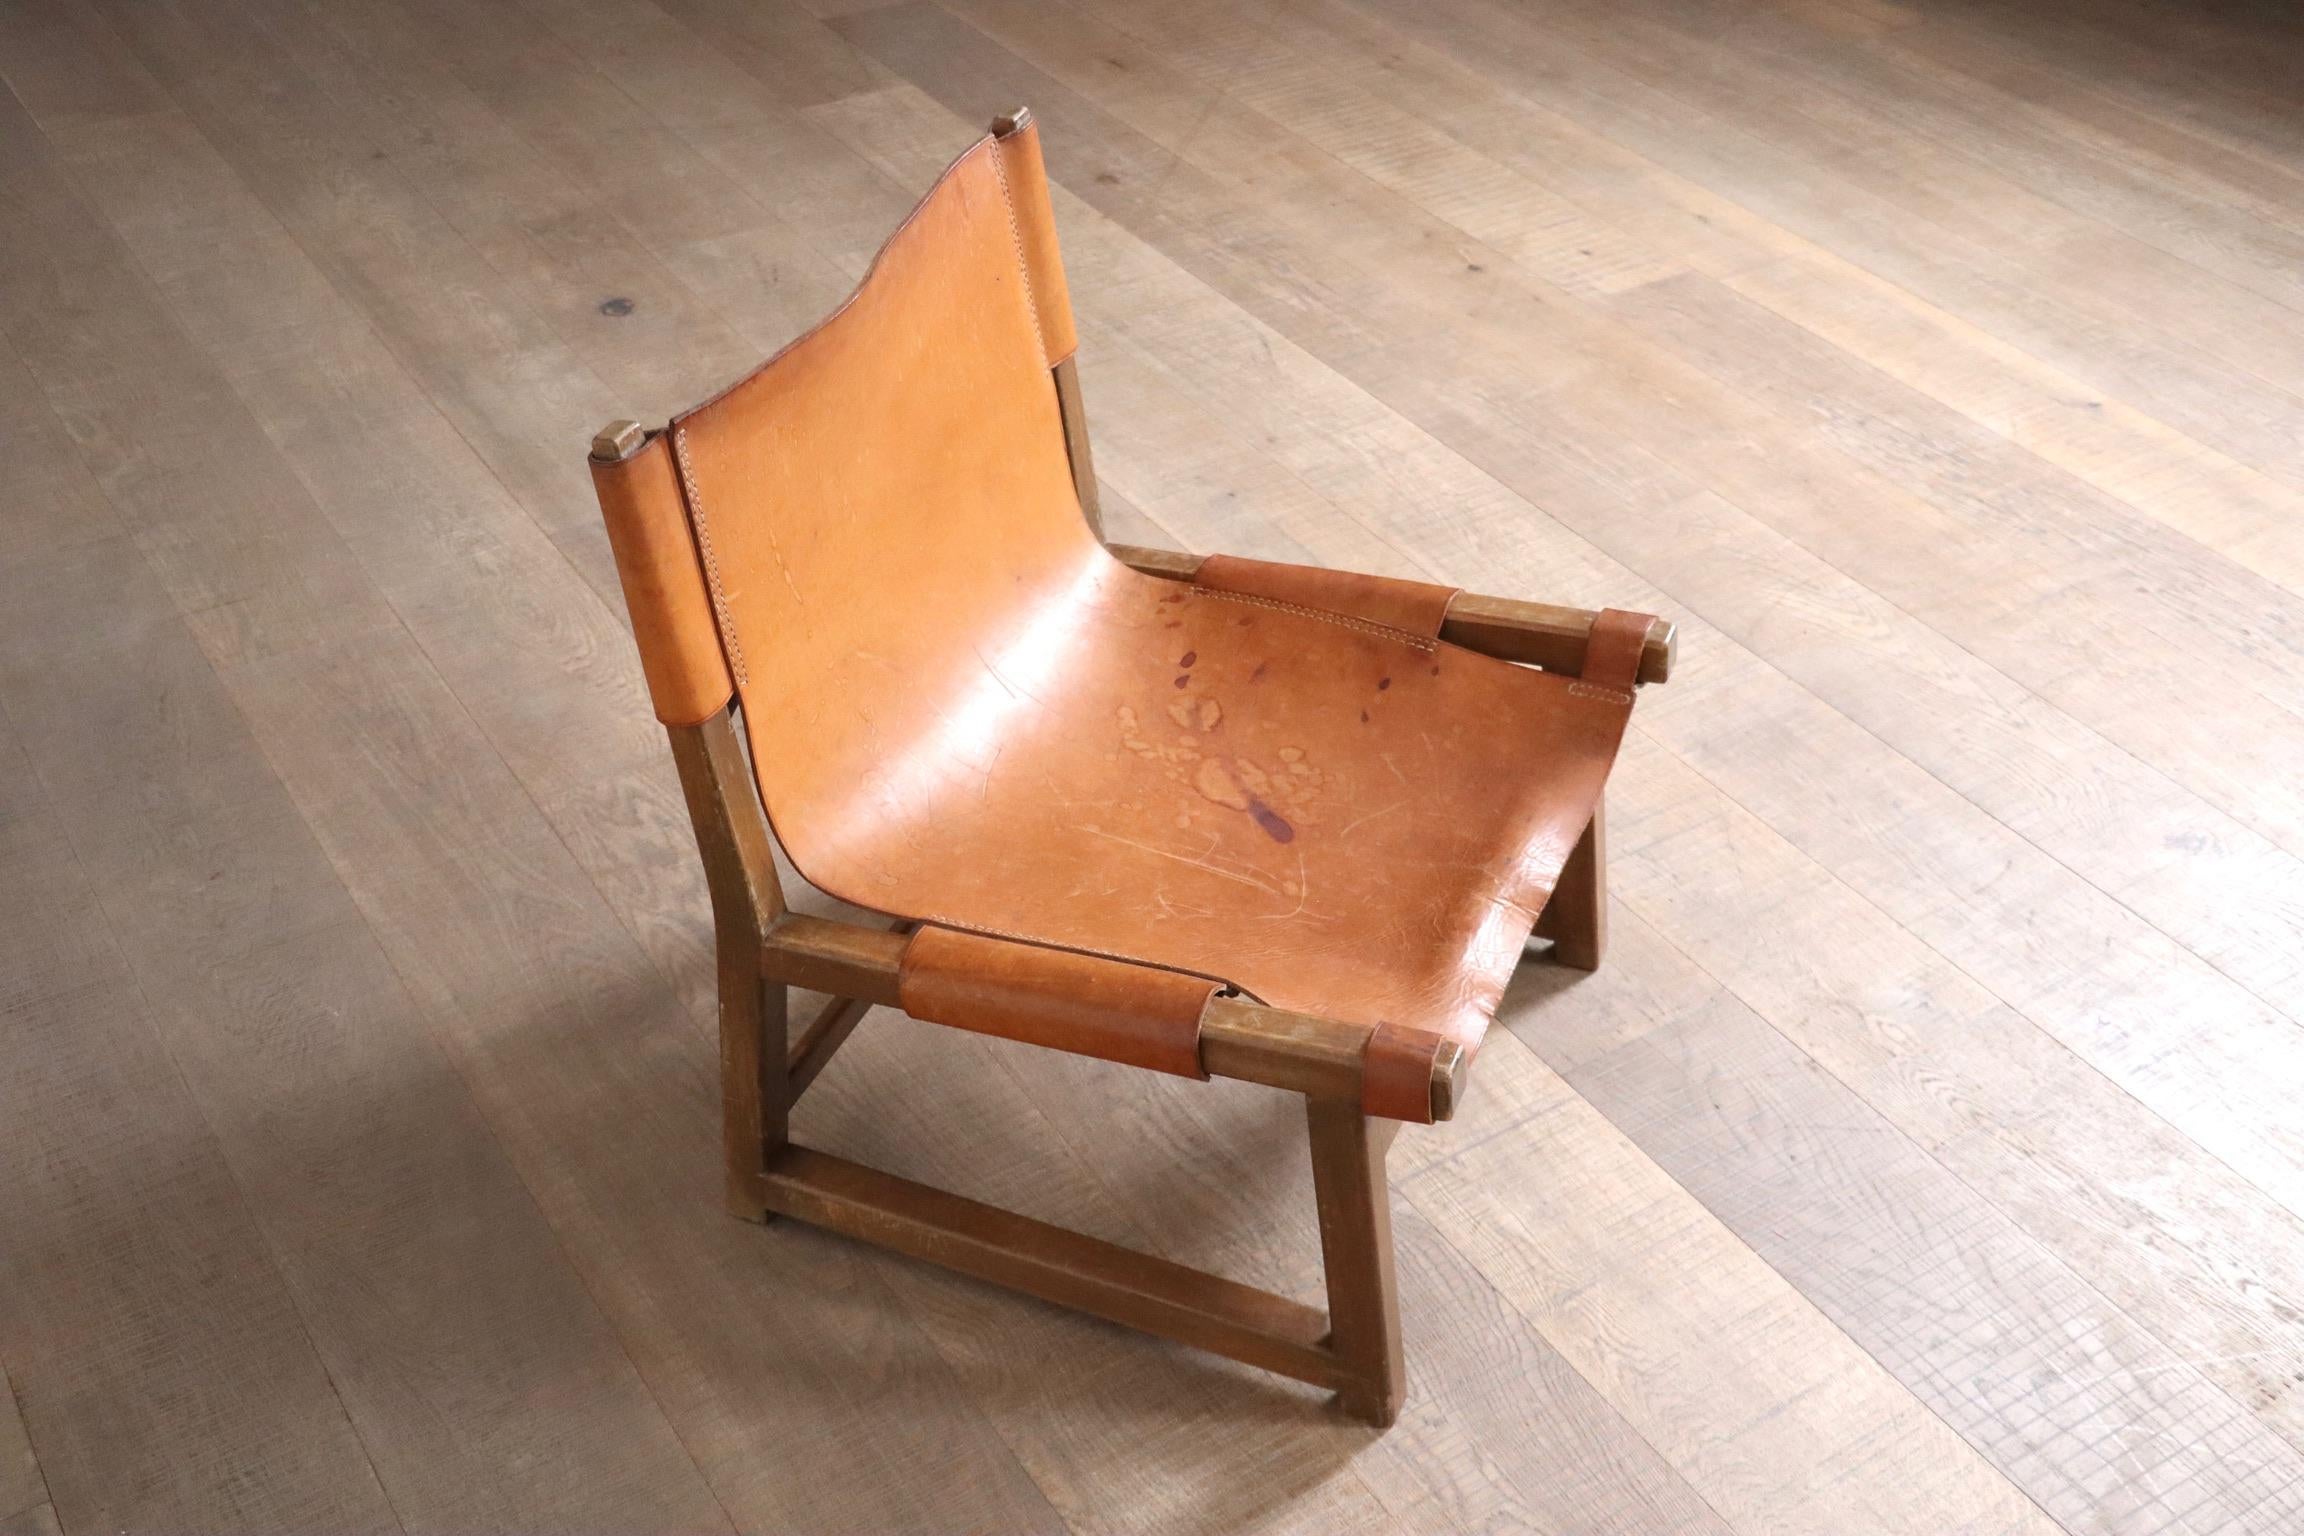 Pair Of Riaza Chairs In Cognac Leather By Paco Muñoz For Darro Gallery, Spain, 1 For Sale 7